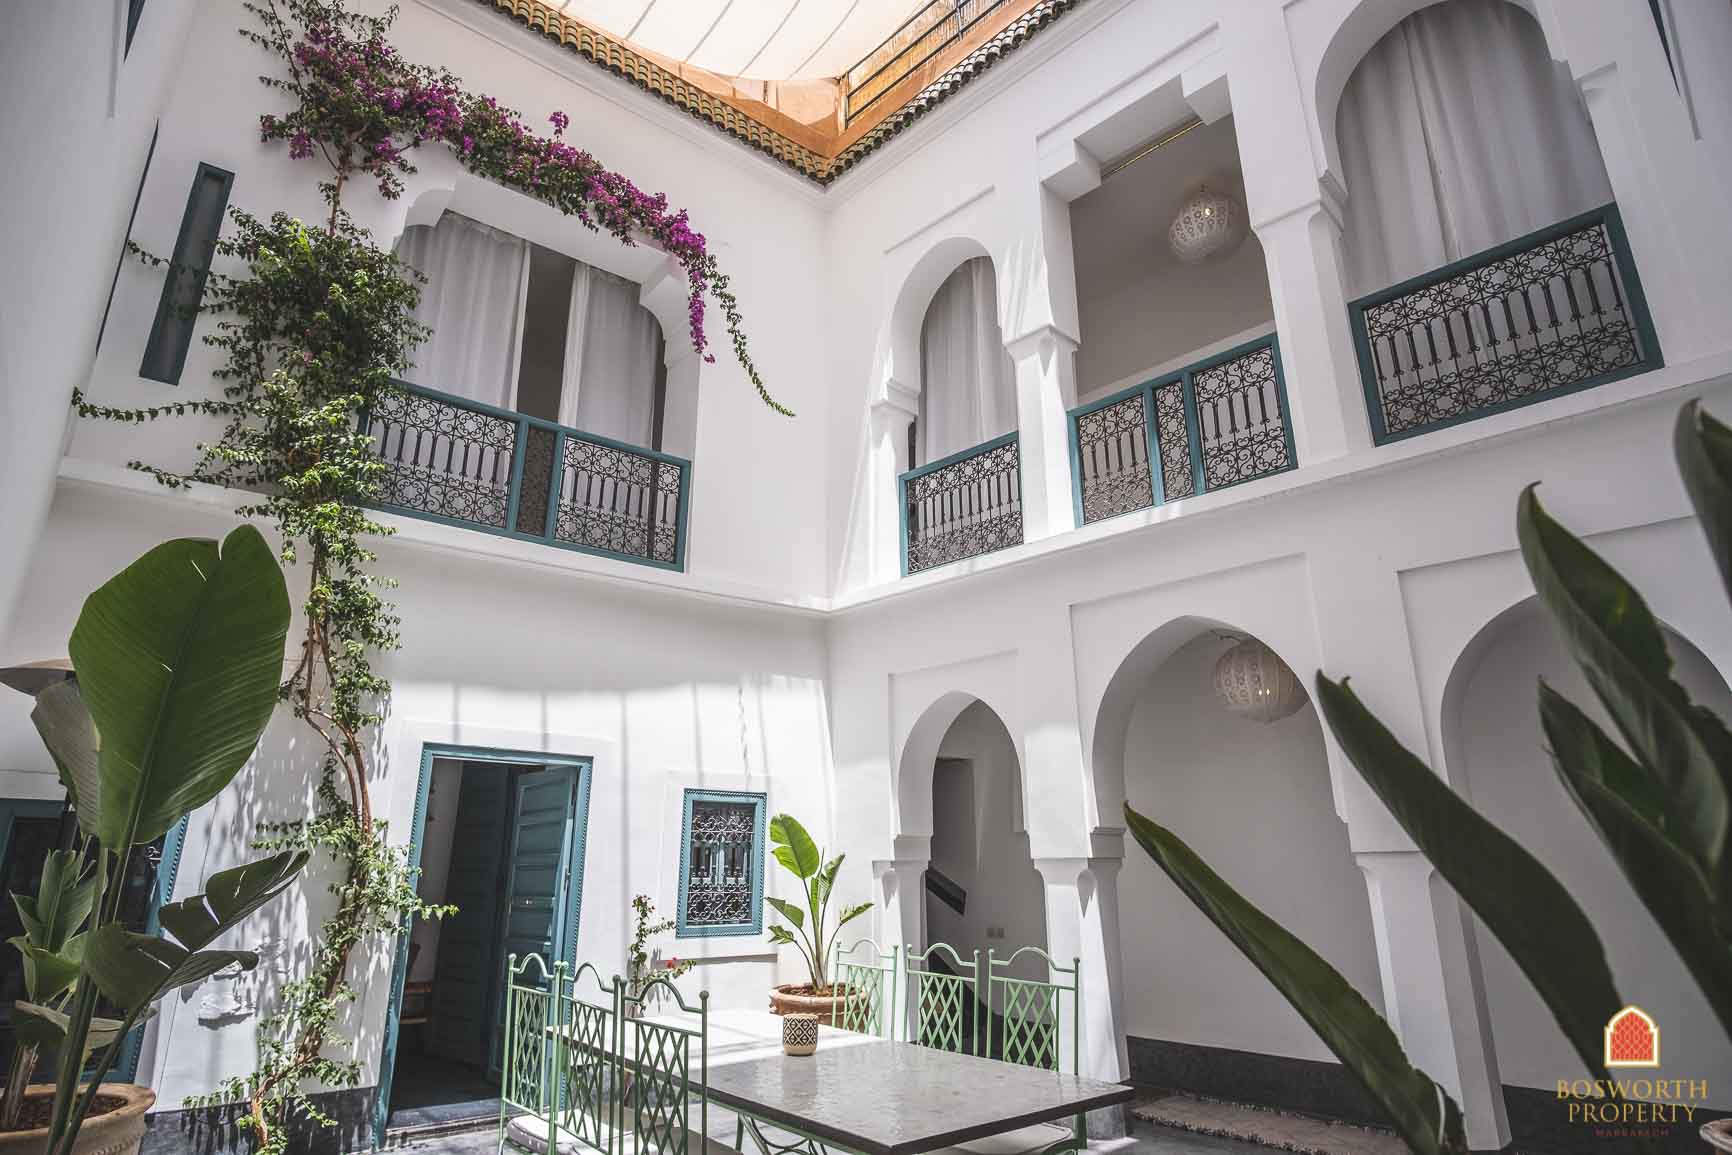 Perfect Pied a Terre Riad For Sale Marrakech - Riads For Sale Marrakech - marrakech real estate - immobilier marrakech - riads a vendre marrakech